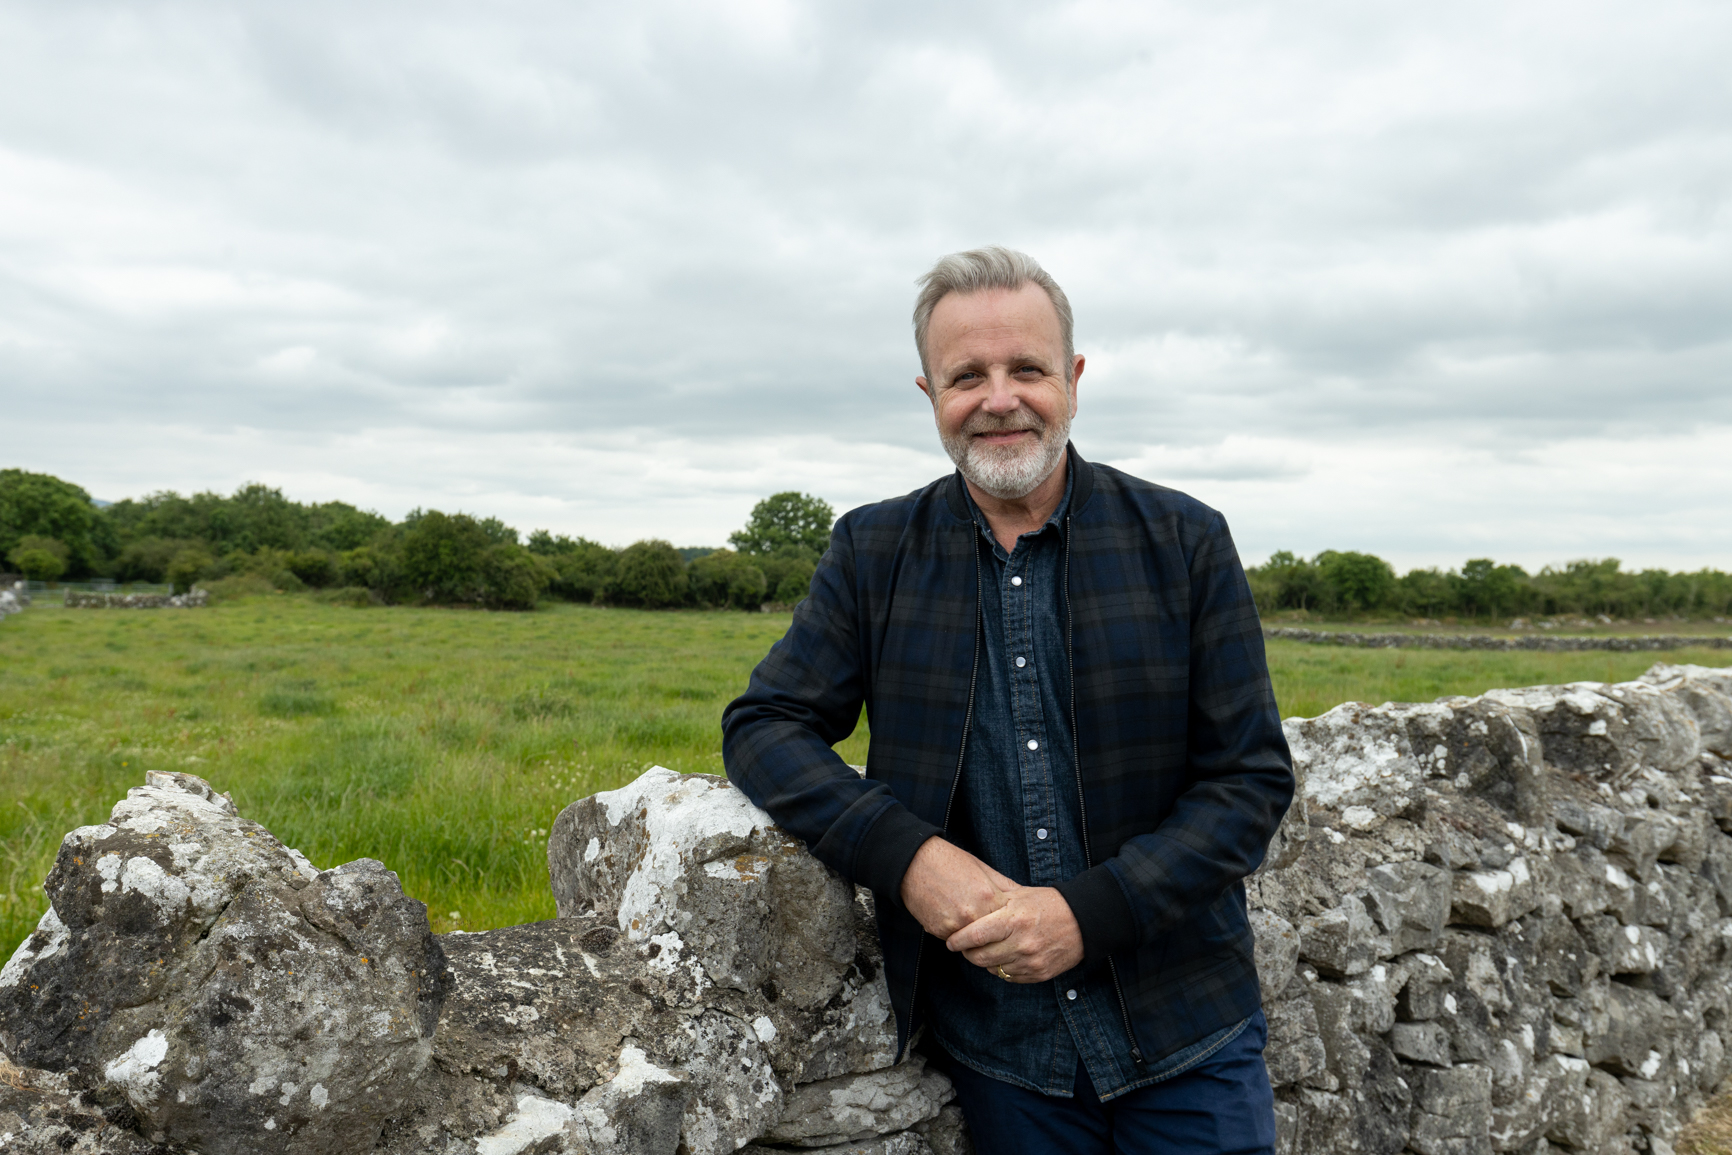 US Travel Show ‘Ireland with Michael’ with an audience of 155 million is scouting for new locations in Ireland to film for 2023 series